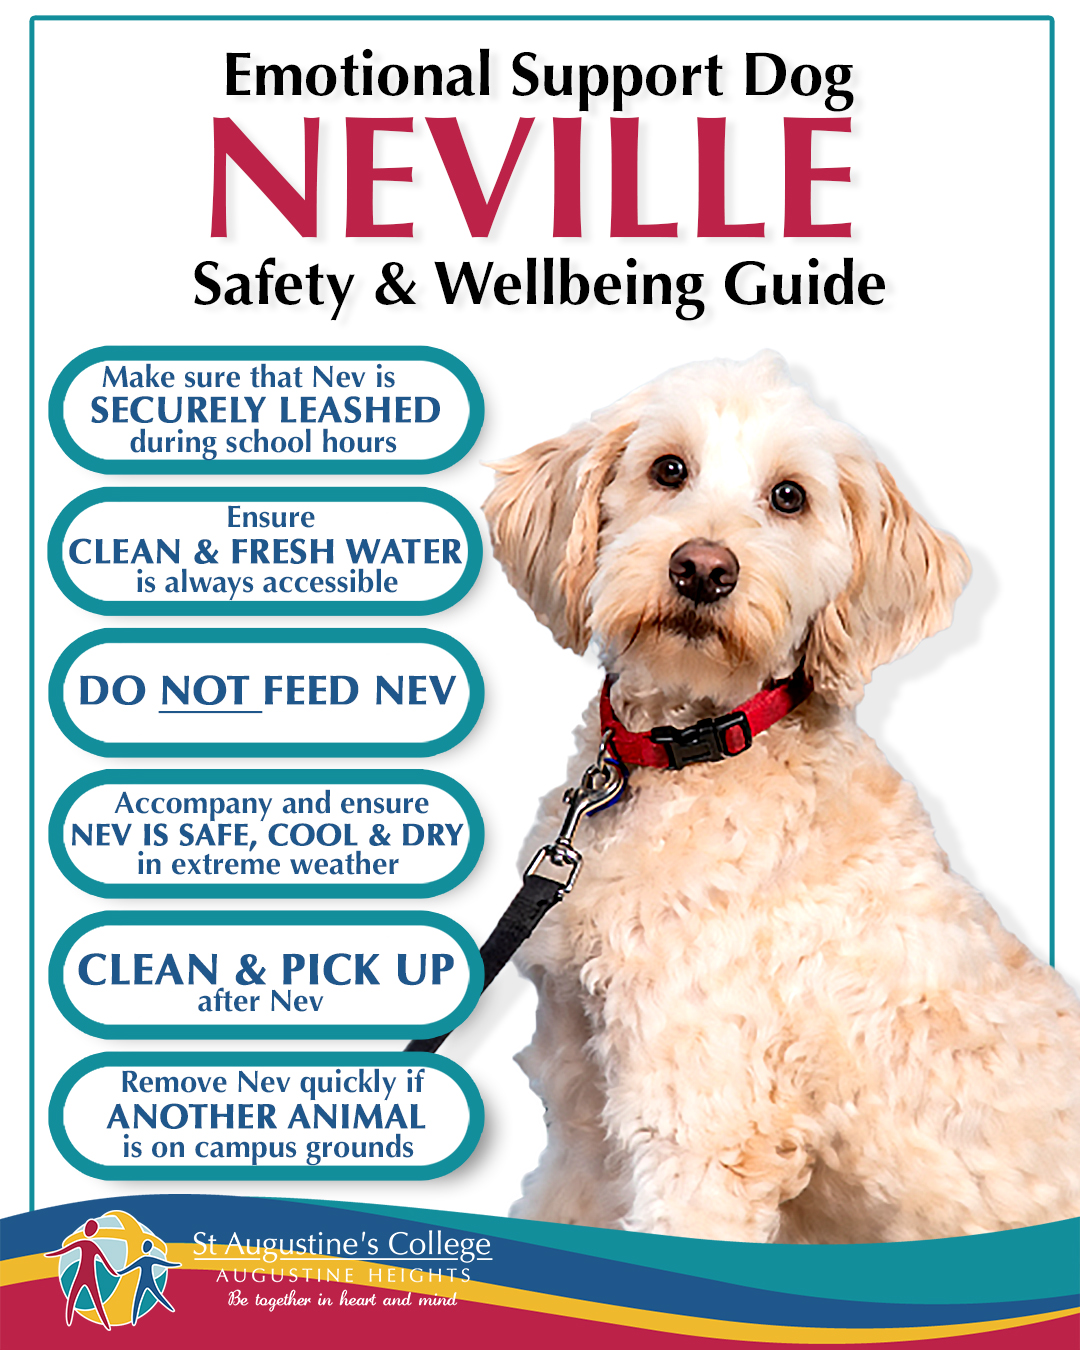 Emotional Support Dog - Neville - Wellbeing & Safety Guide Web Poster.jpg